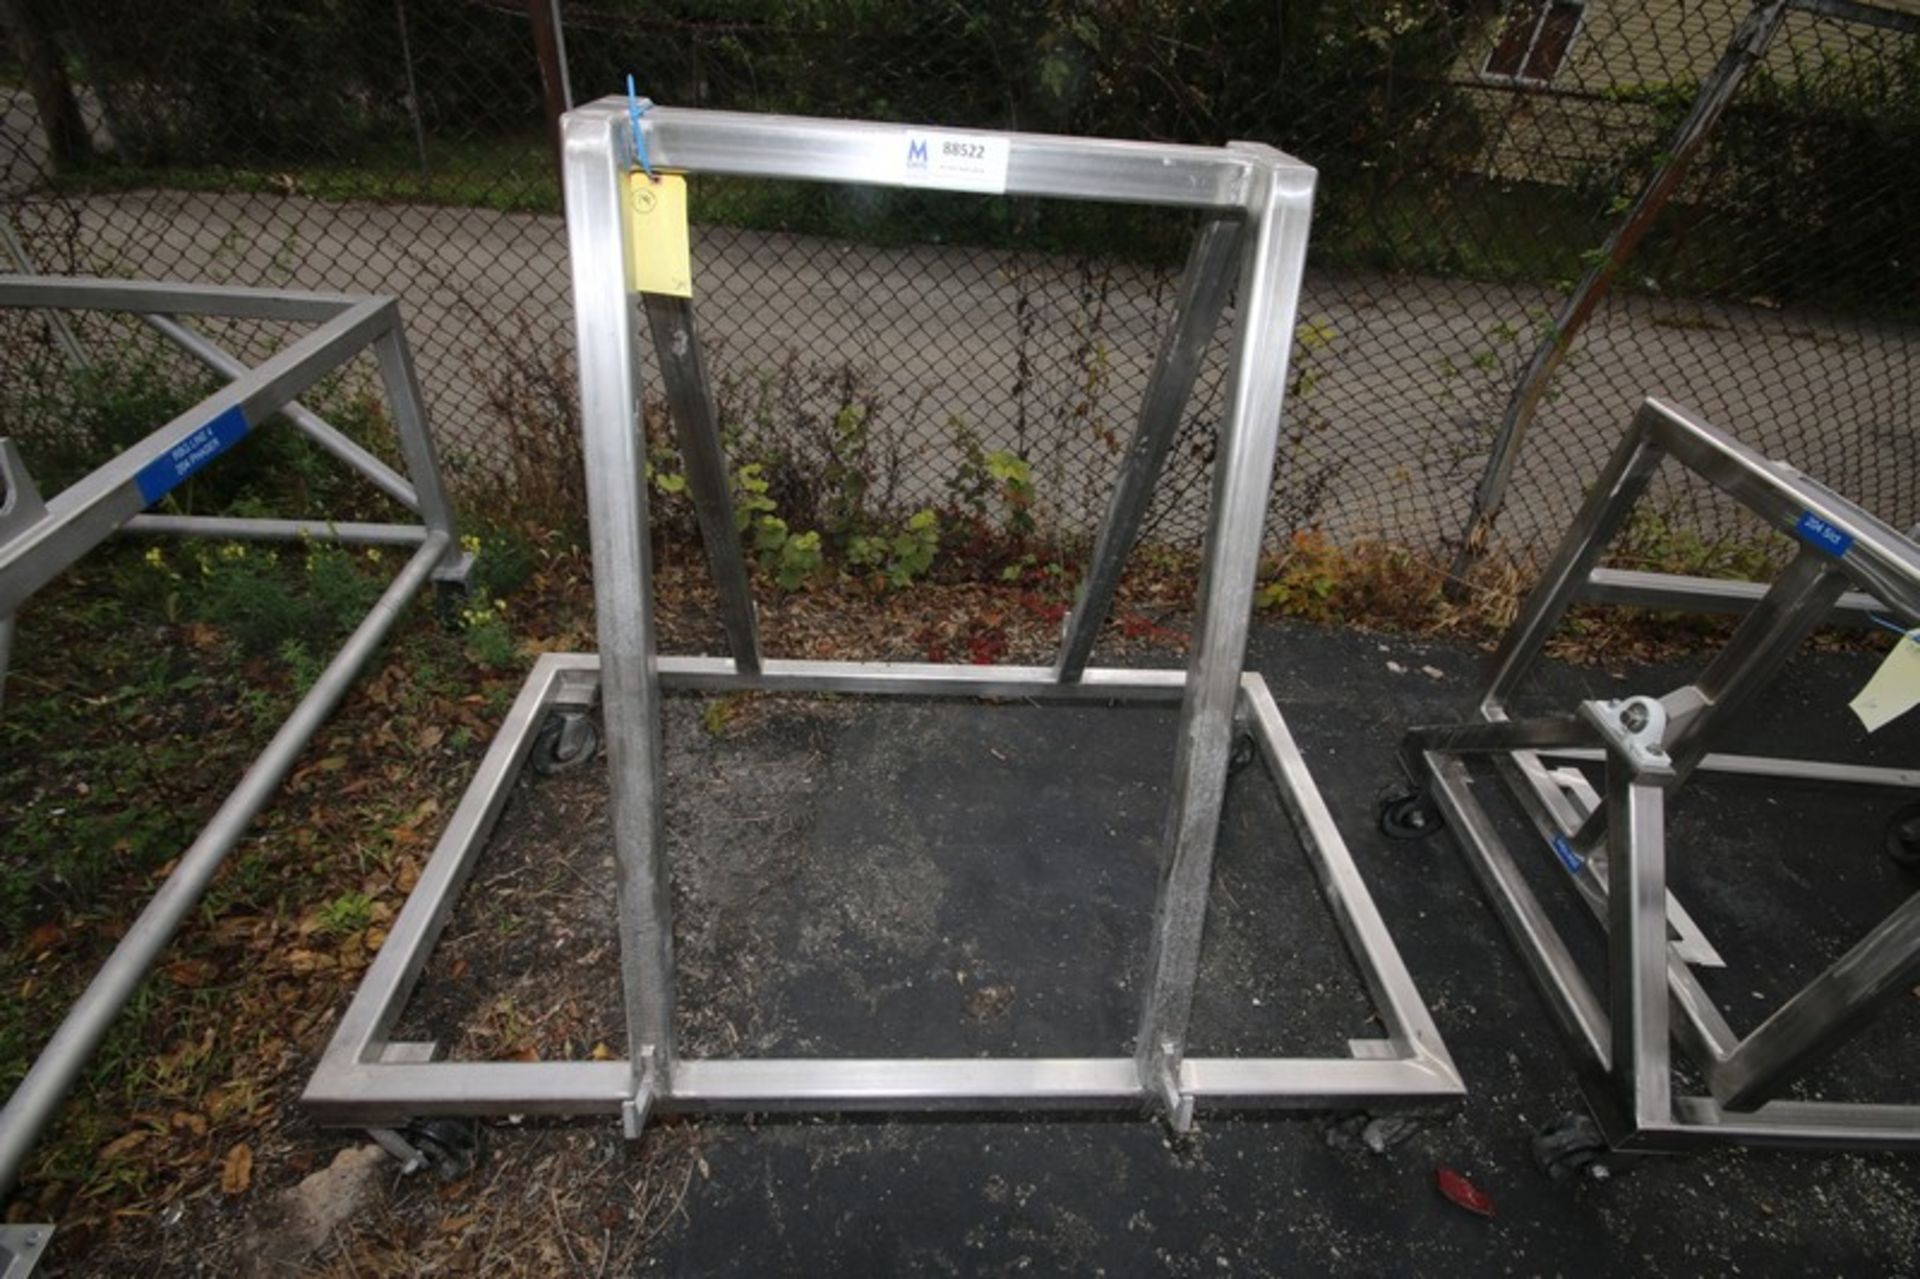 5' L x 3' W x 51" H, S/S Portable Rack (INV#88522)(Located @ the MDG Auction Showroom in Pgh., PA)(